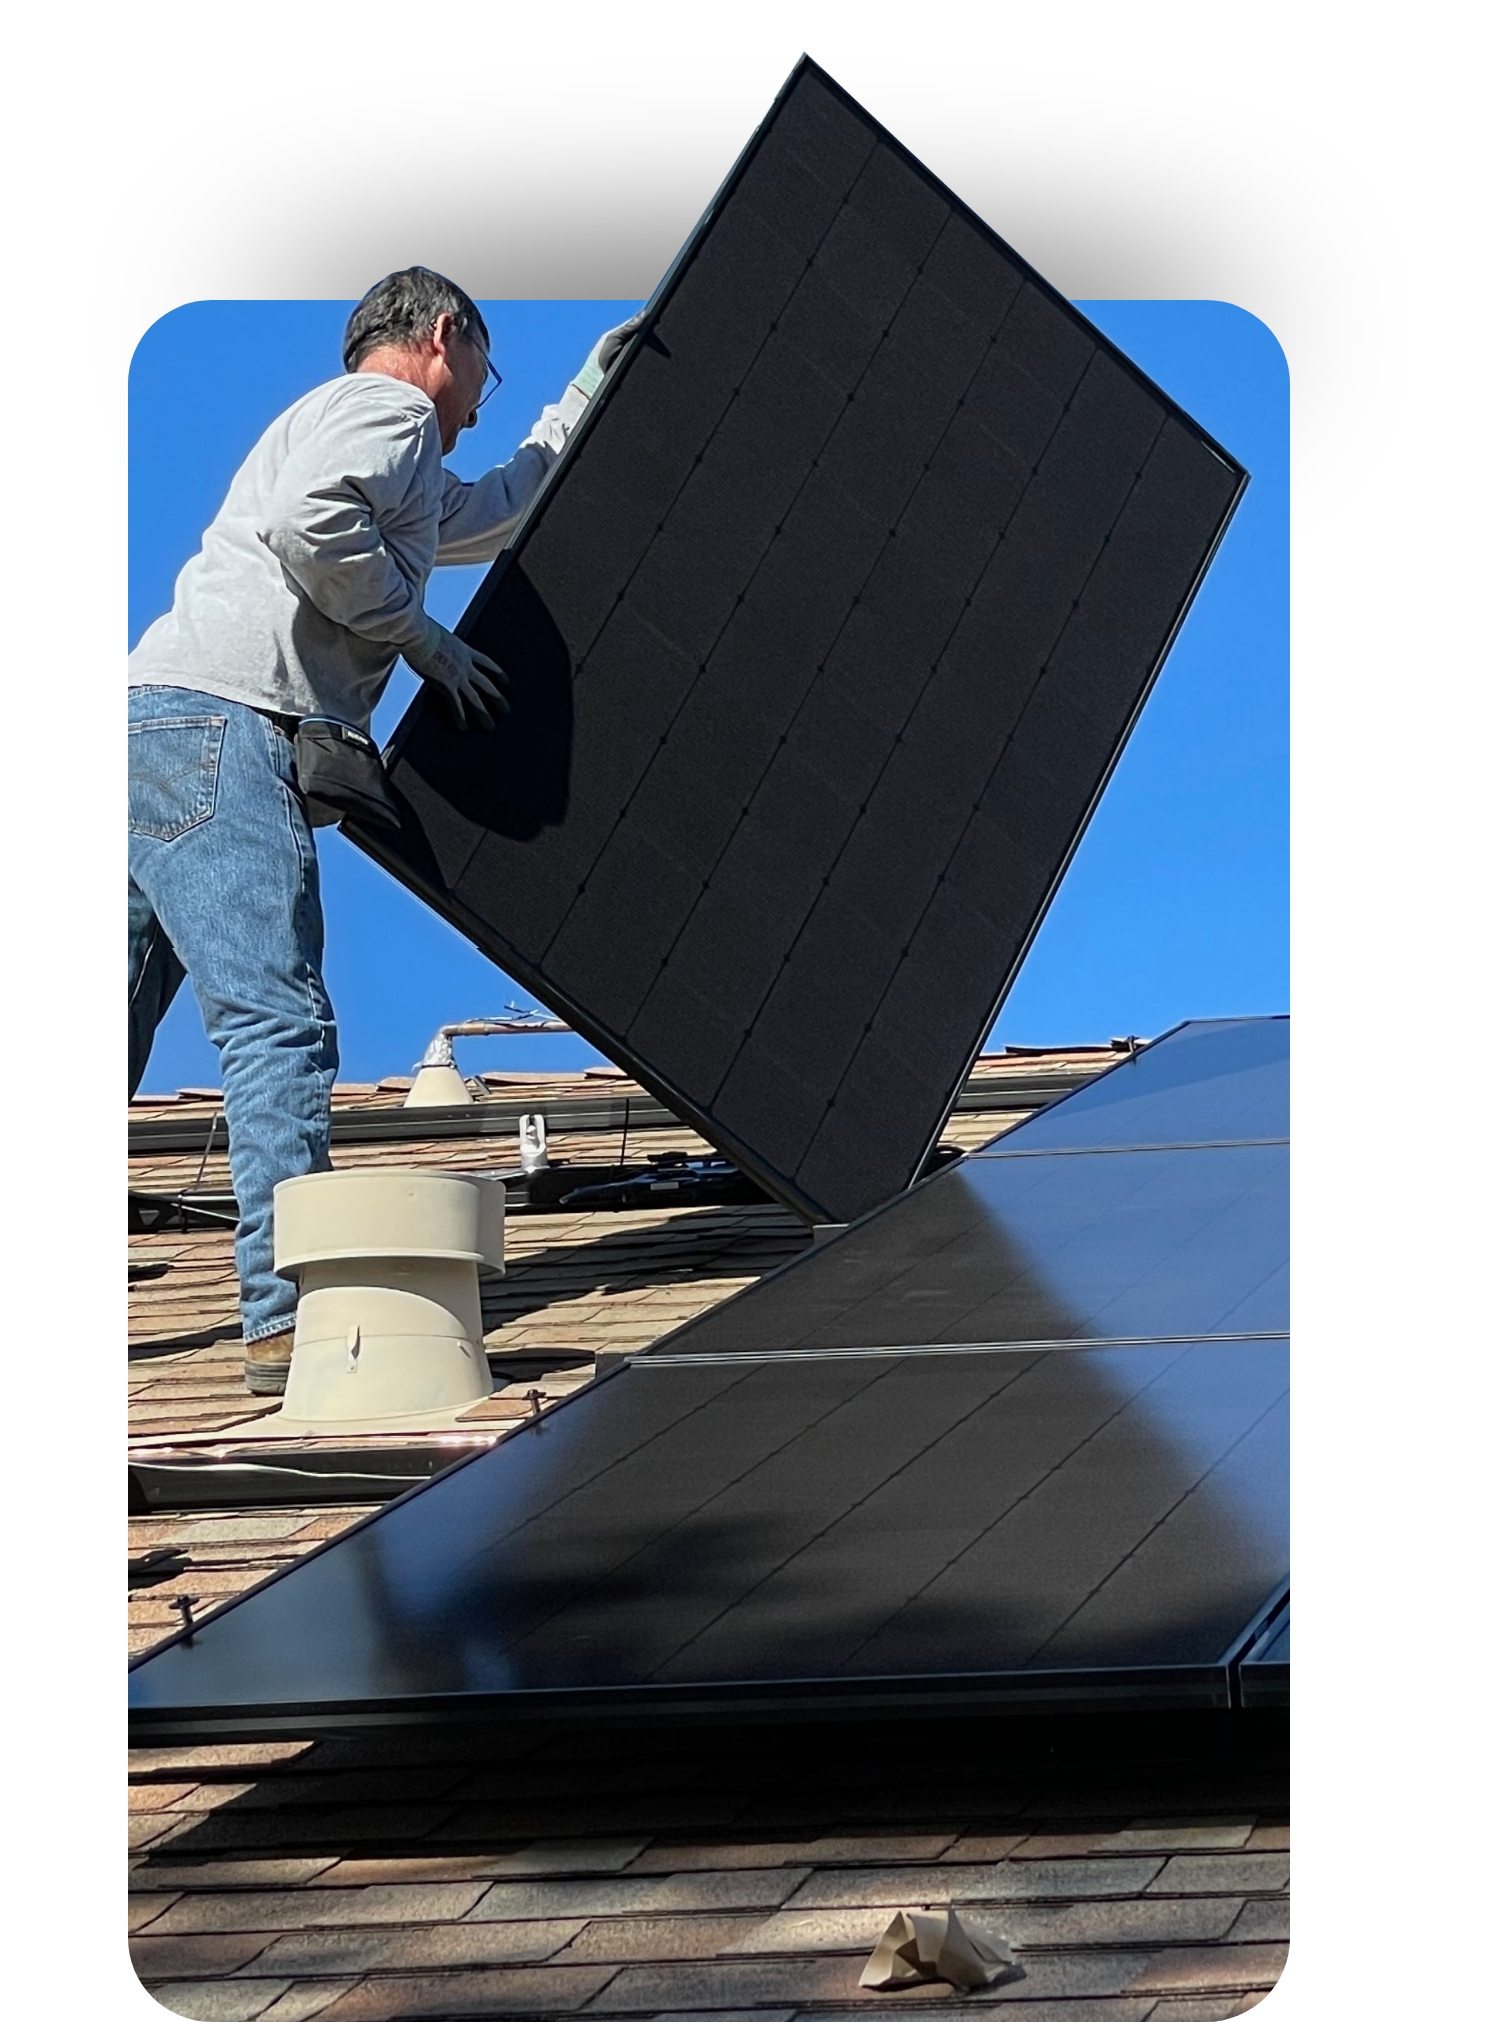 As the best solar company in Greenwood Village, CO, Solar by Peak to Peak is the solar installer you need to take advantage of solar savings with the best solar equipment.